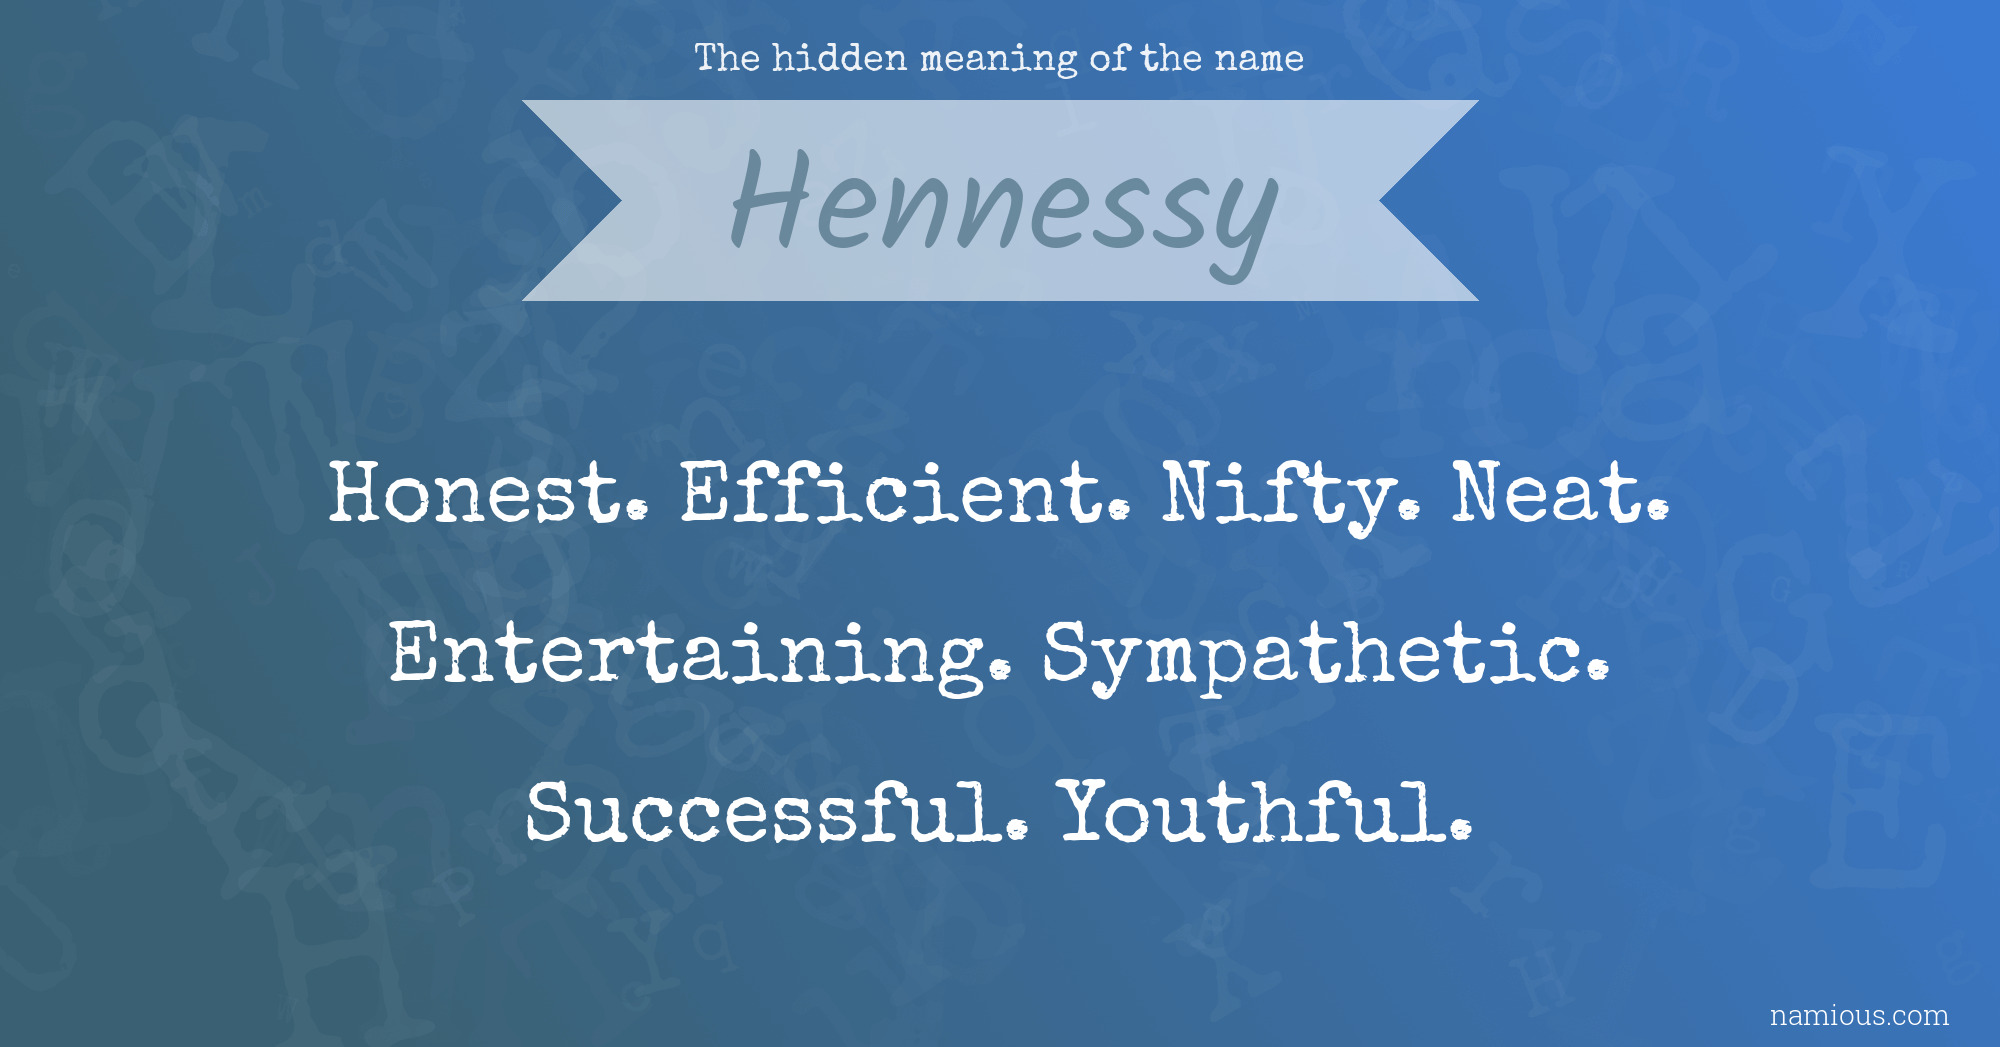 The hidden meaning of the name Hennessy